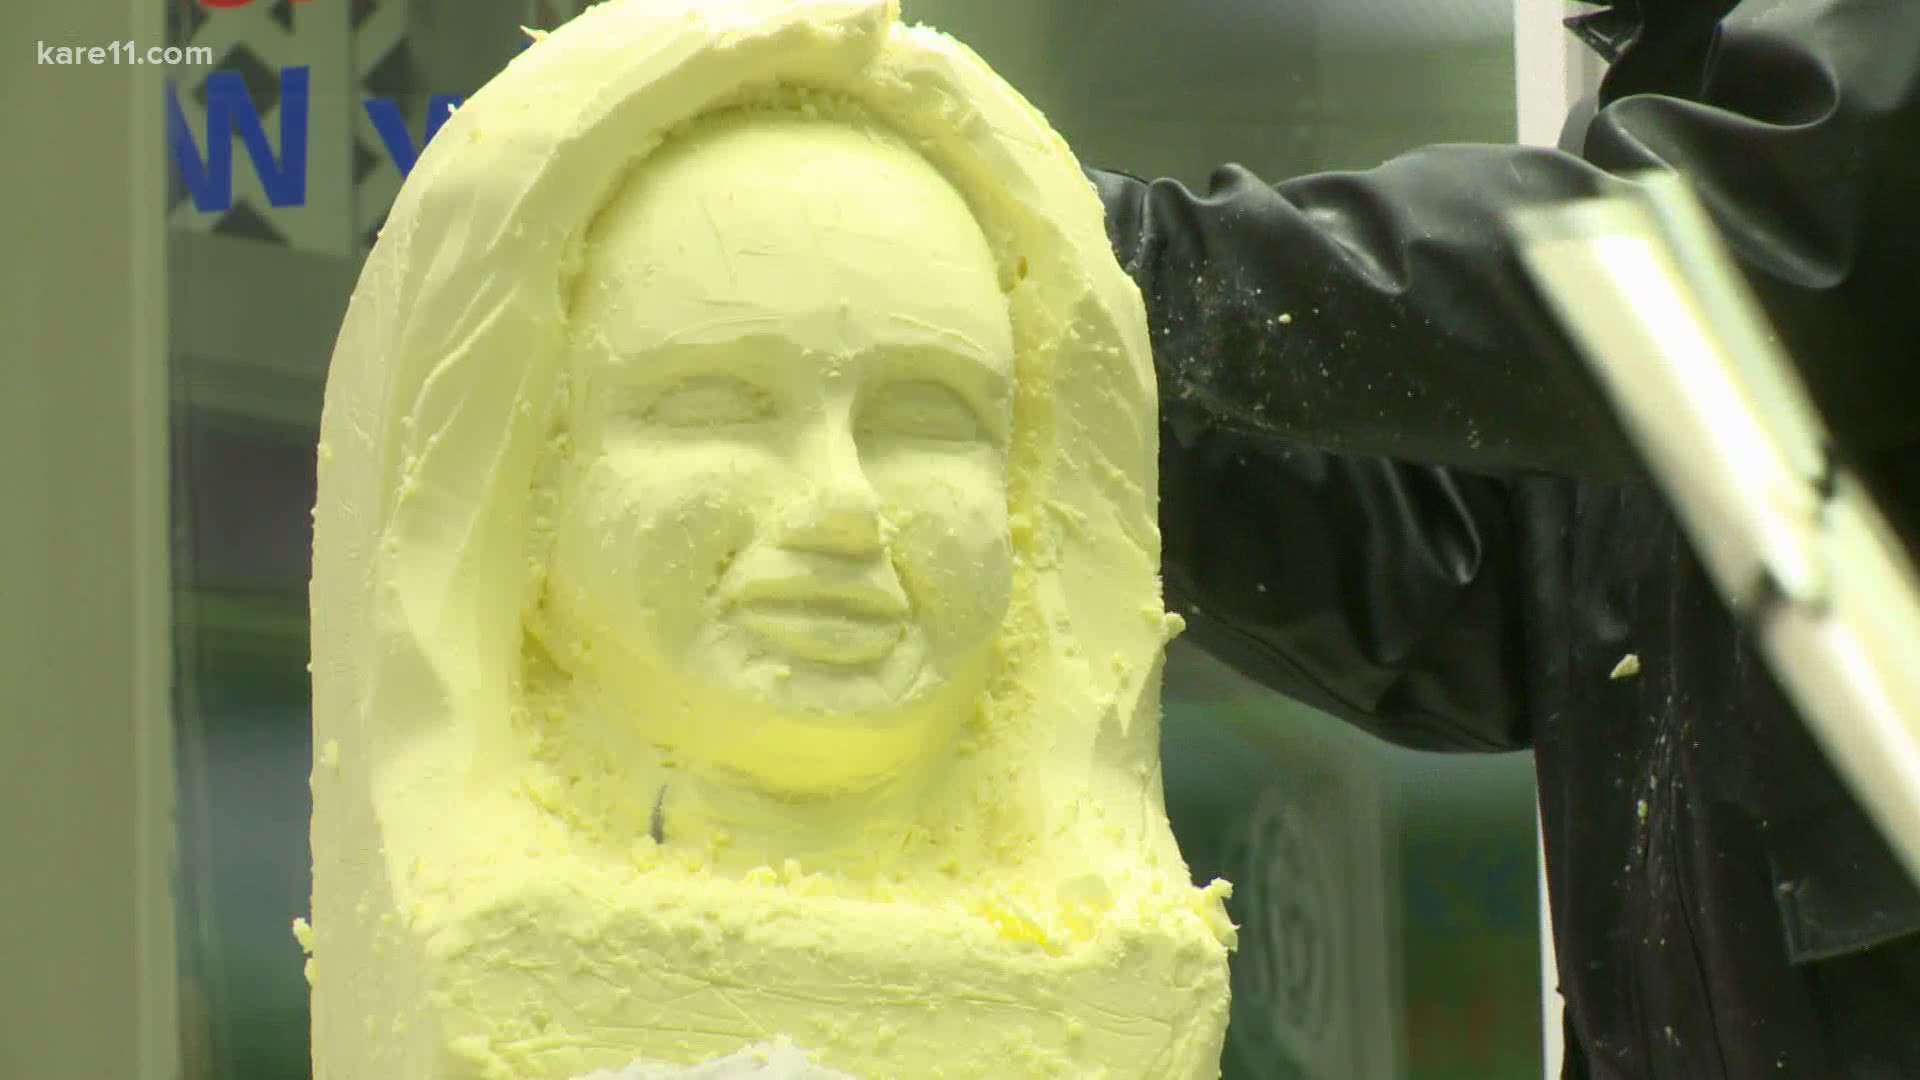 The butter sculptures are back; here's how to watch